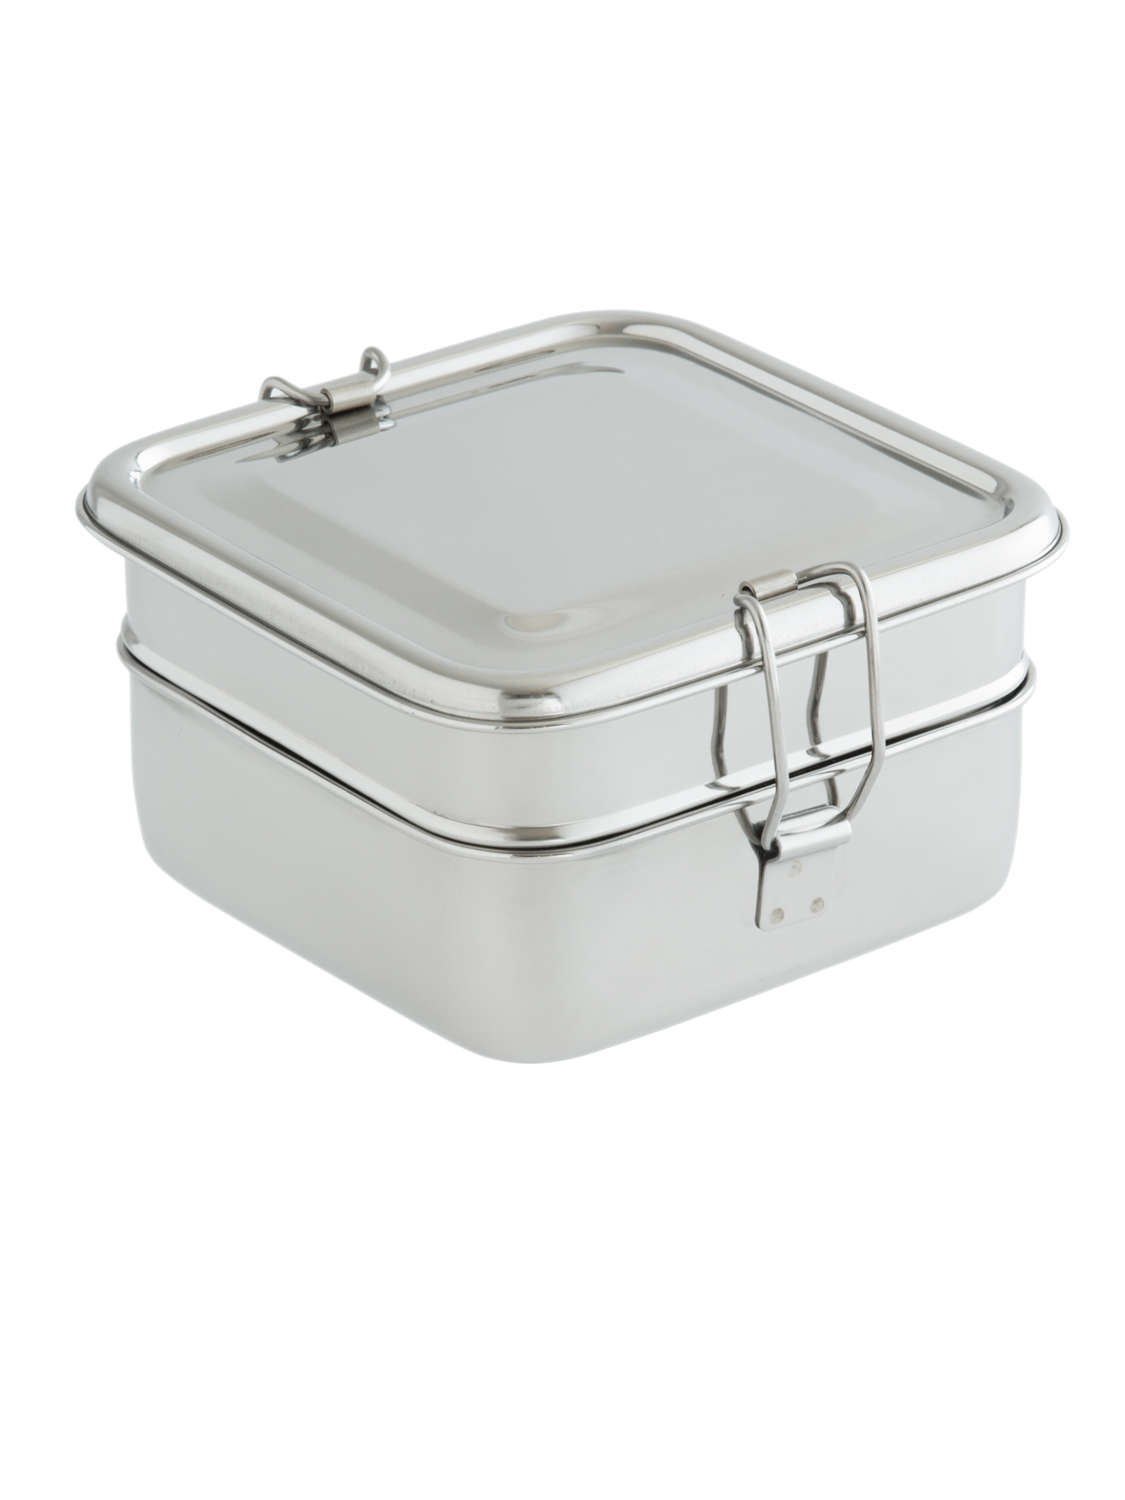 Stainless Steel Traditional Tiffin Box, Lunch Box 2 Containers  School/Office